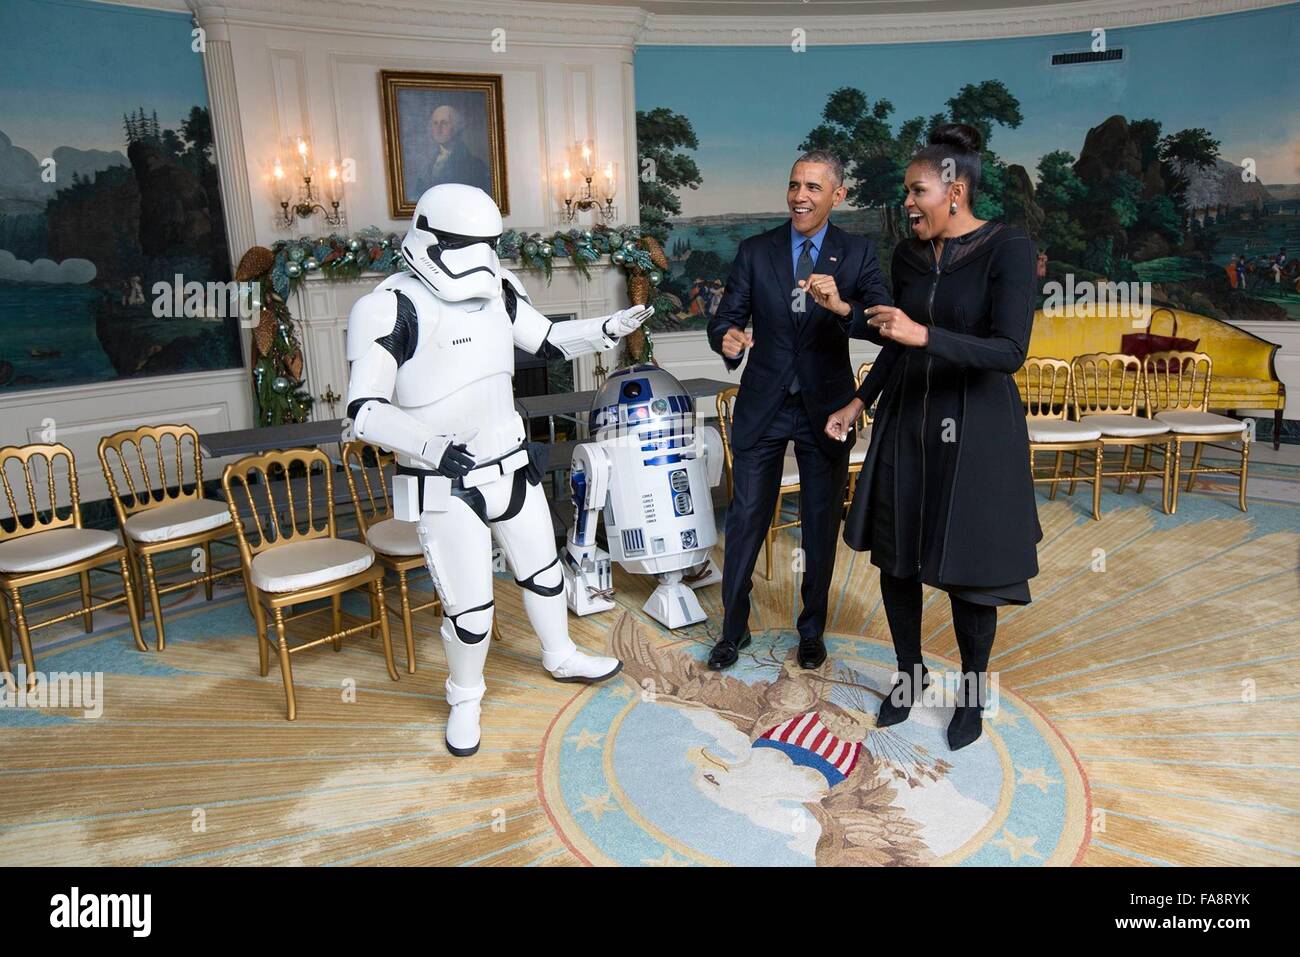 U.S. President Barack Obama and First Lady Michelle Obama meet with an Imperial Storm Trooper and R2D2, characters from the Star Wars movies at the White House December 18, 2015 in Washington, DC. The characters were there for a screening of Star Wars: The Force Awakens at the White House Family Theater, where President Obama and the First Lady were hosting Gold Star families. Stock Photo